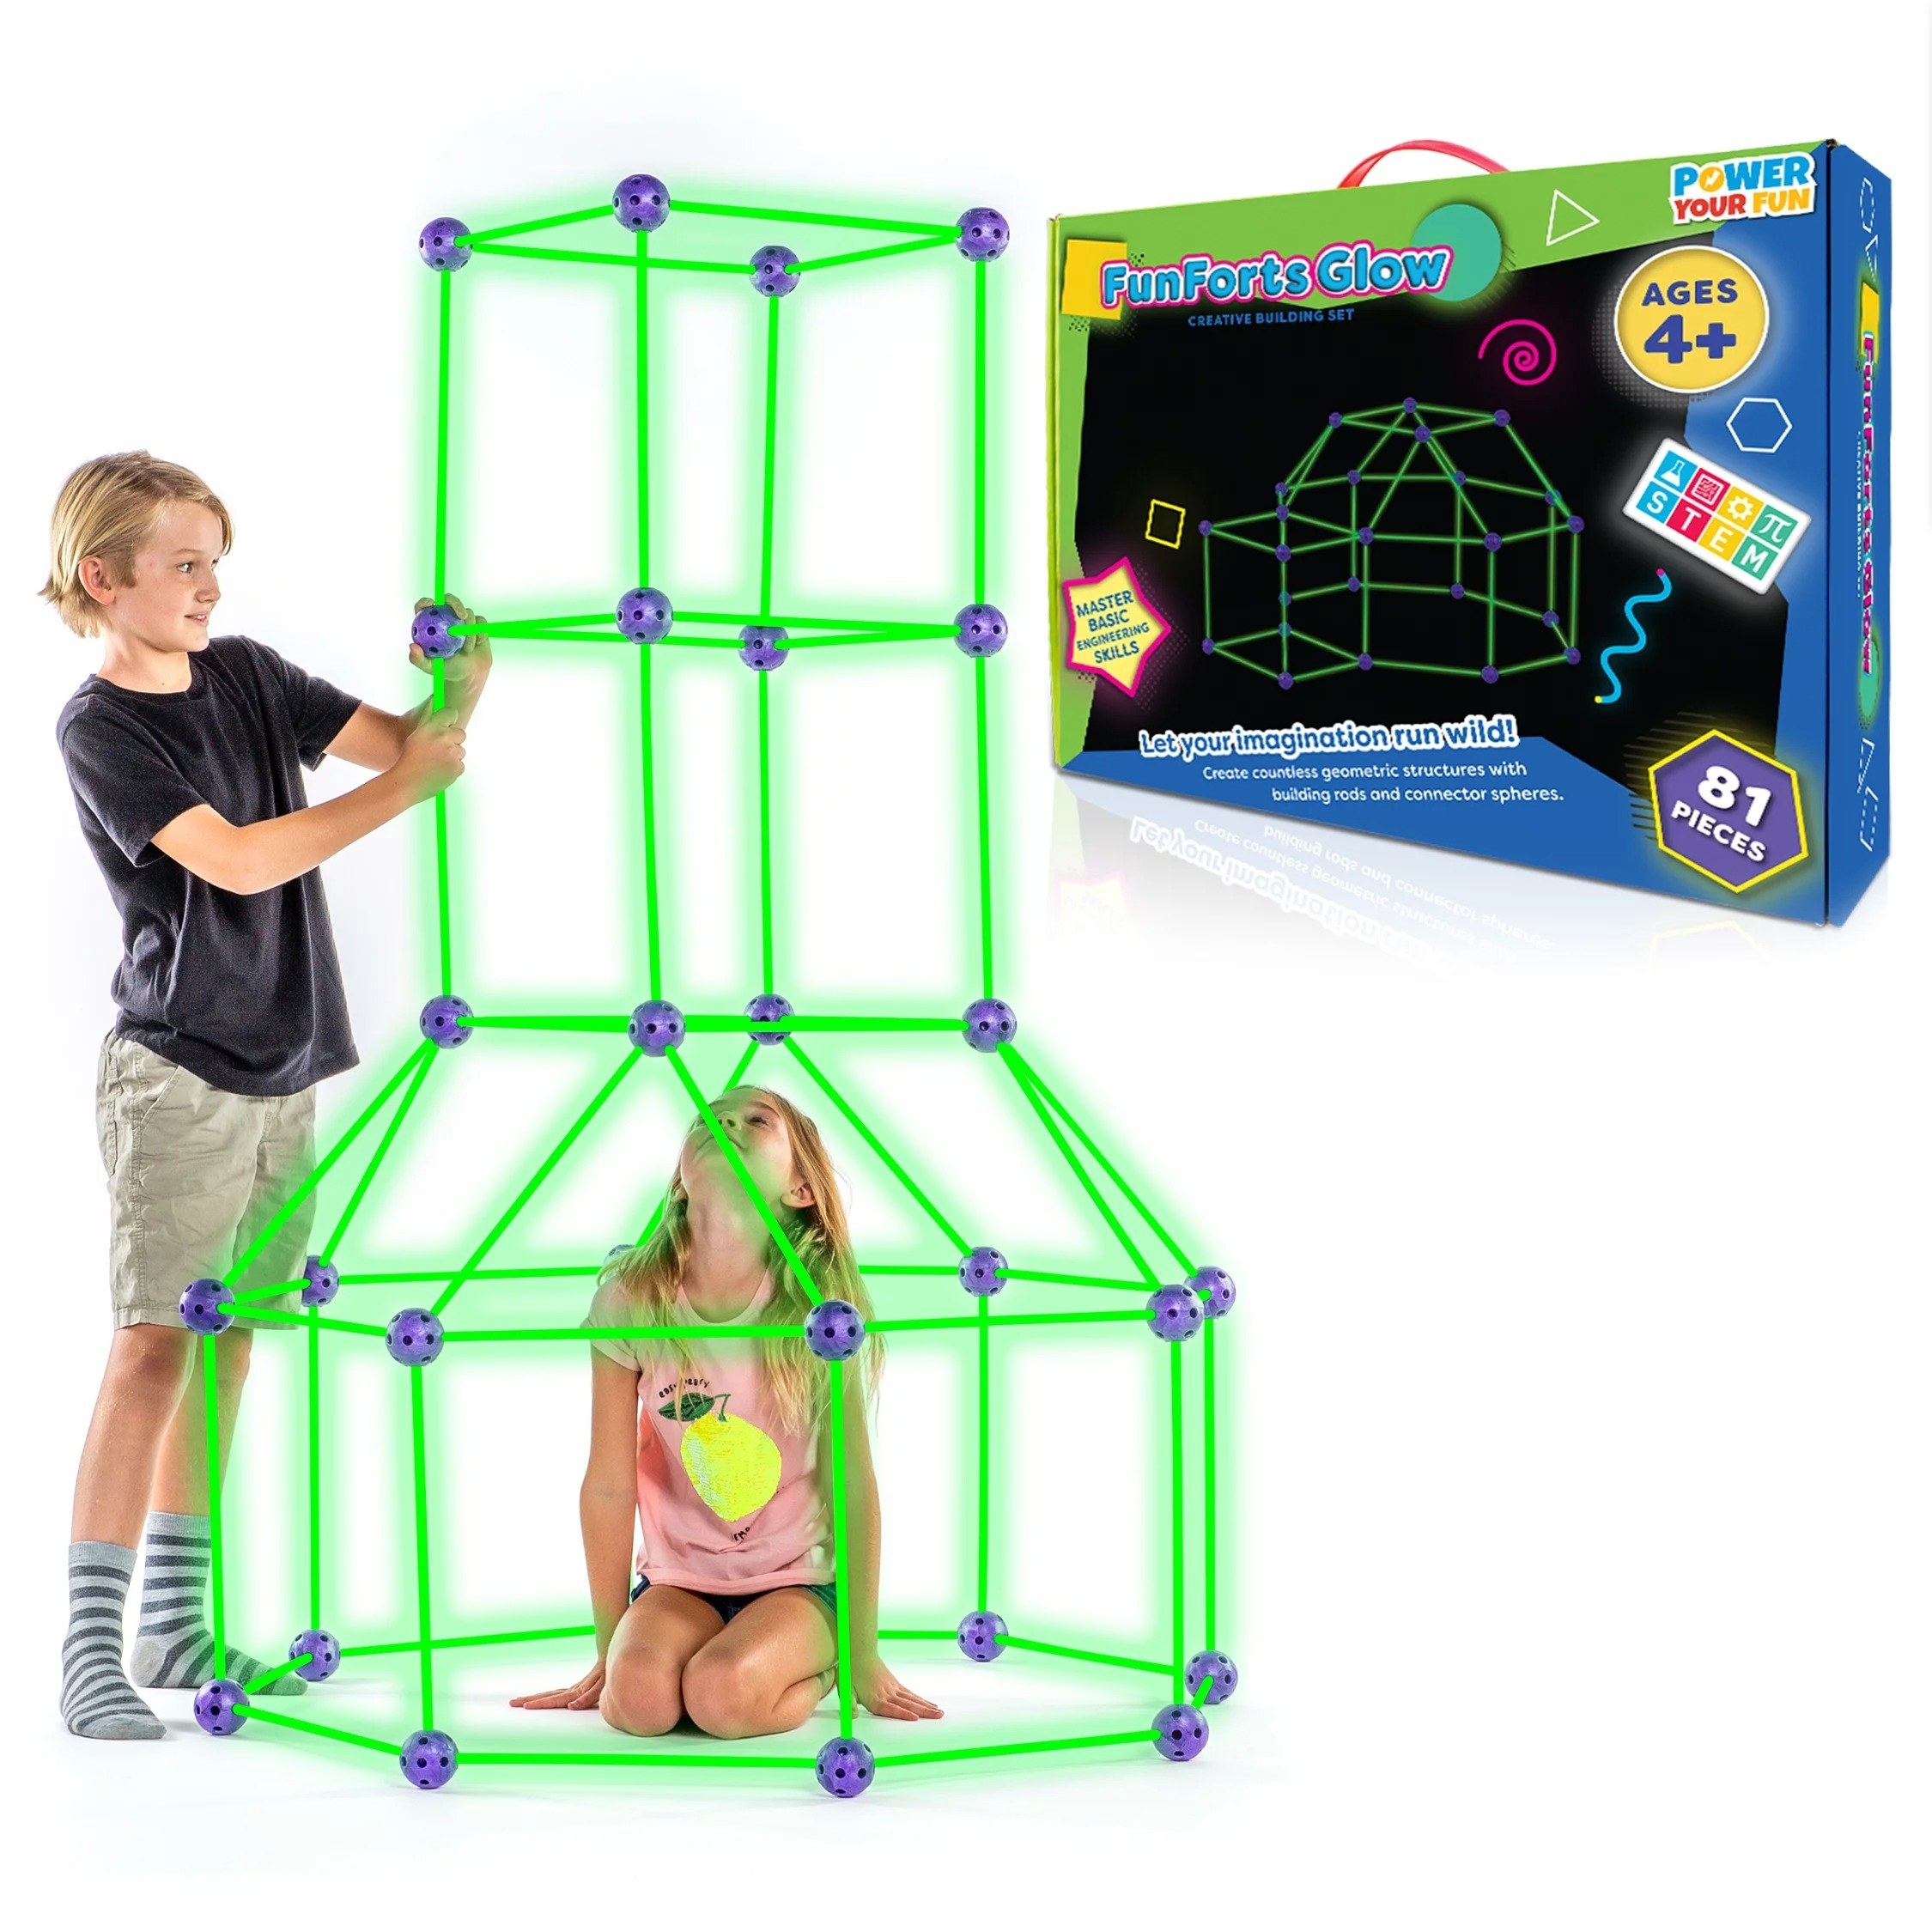 Two kids building the glow in the dark fort